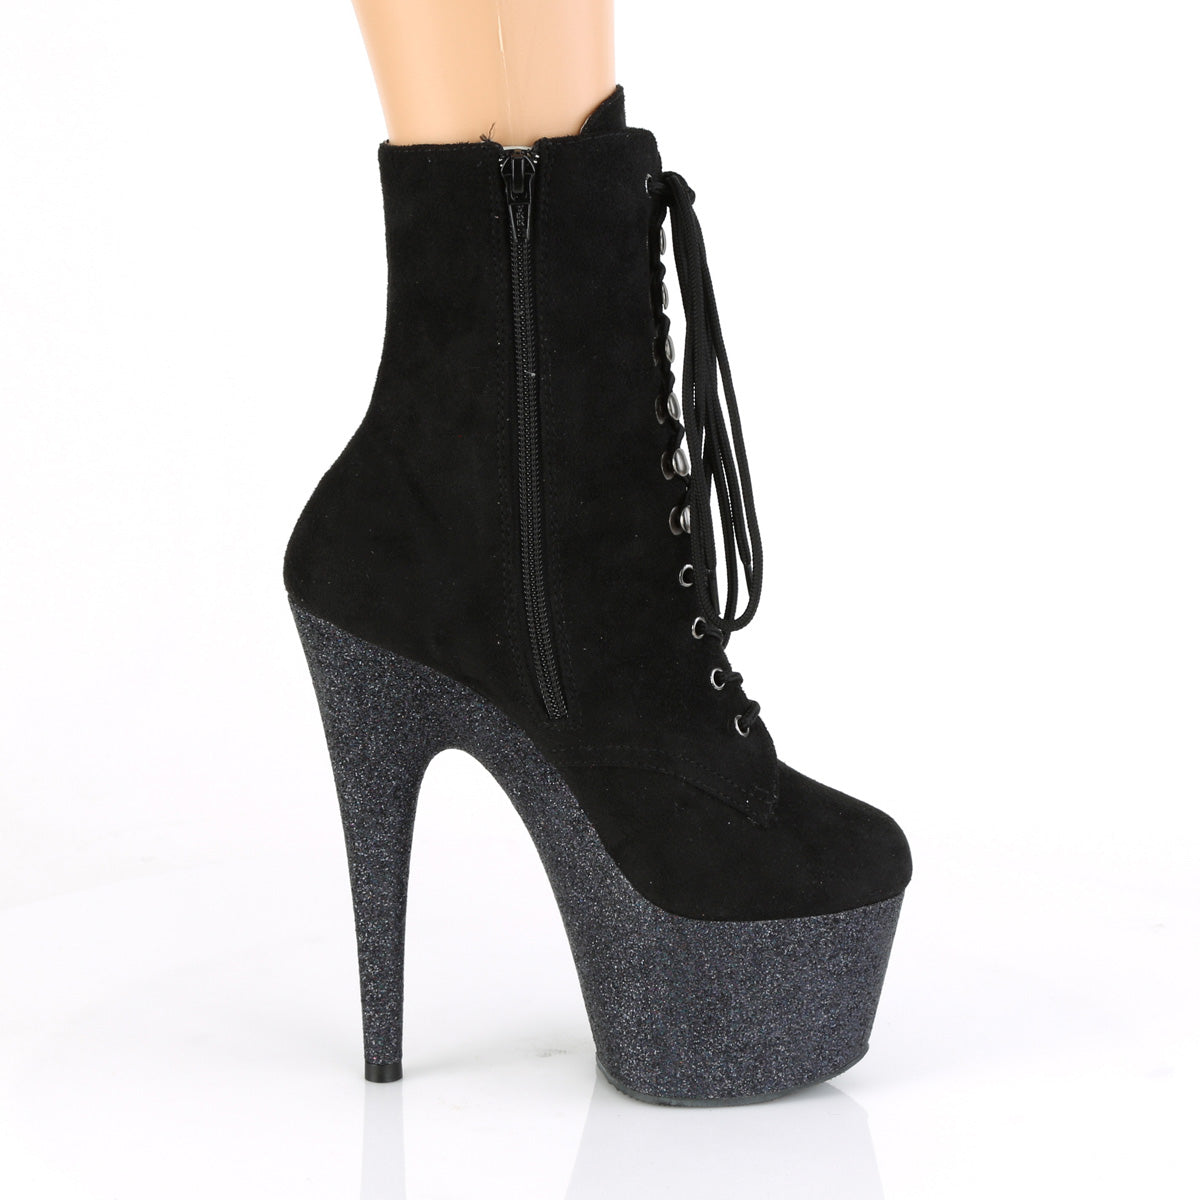 ADORE-1020FSMG 7 Inch Heel Black Exotic Dancing Ankle Boots-Pleaser- Sexy Shoes Fetish Heels